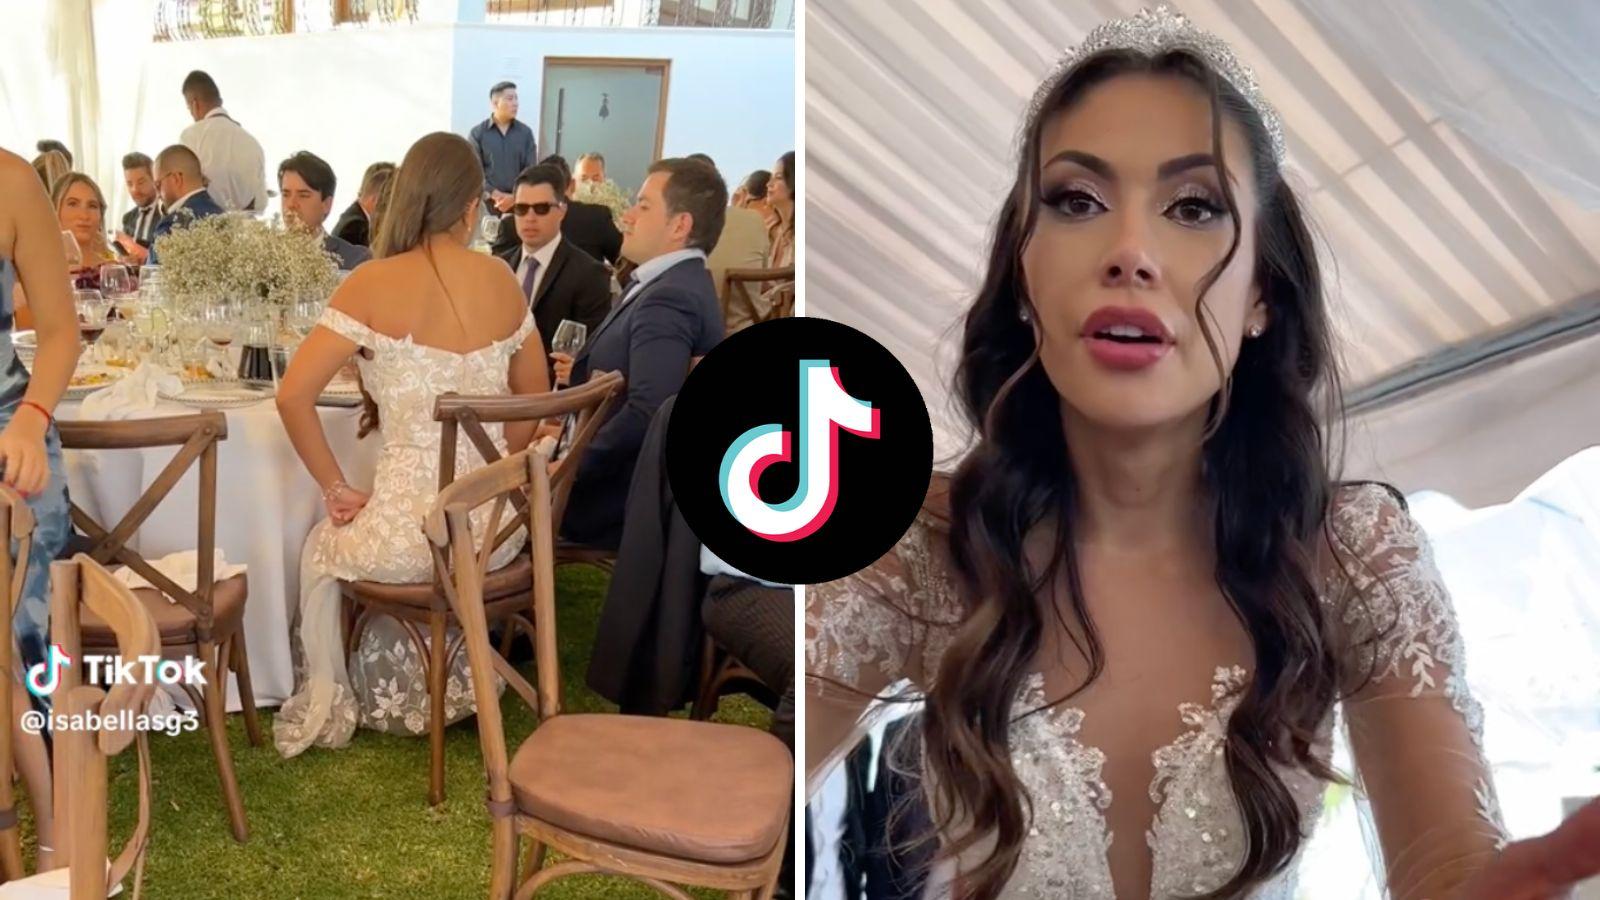 Wedding guest wearing white gown, bride's reaction